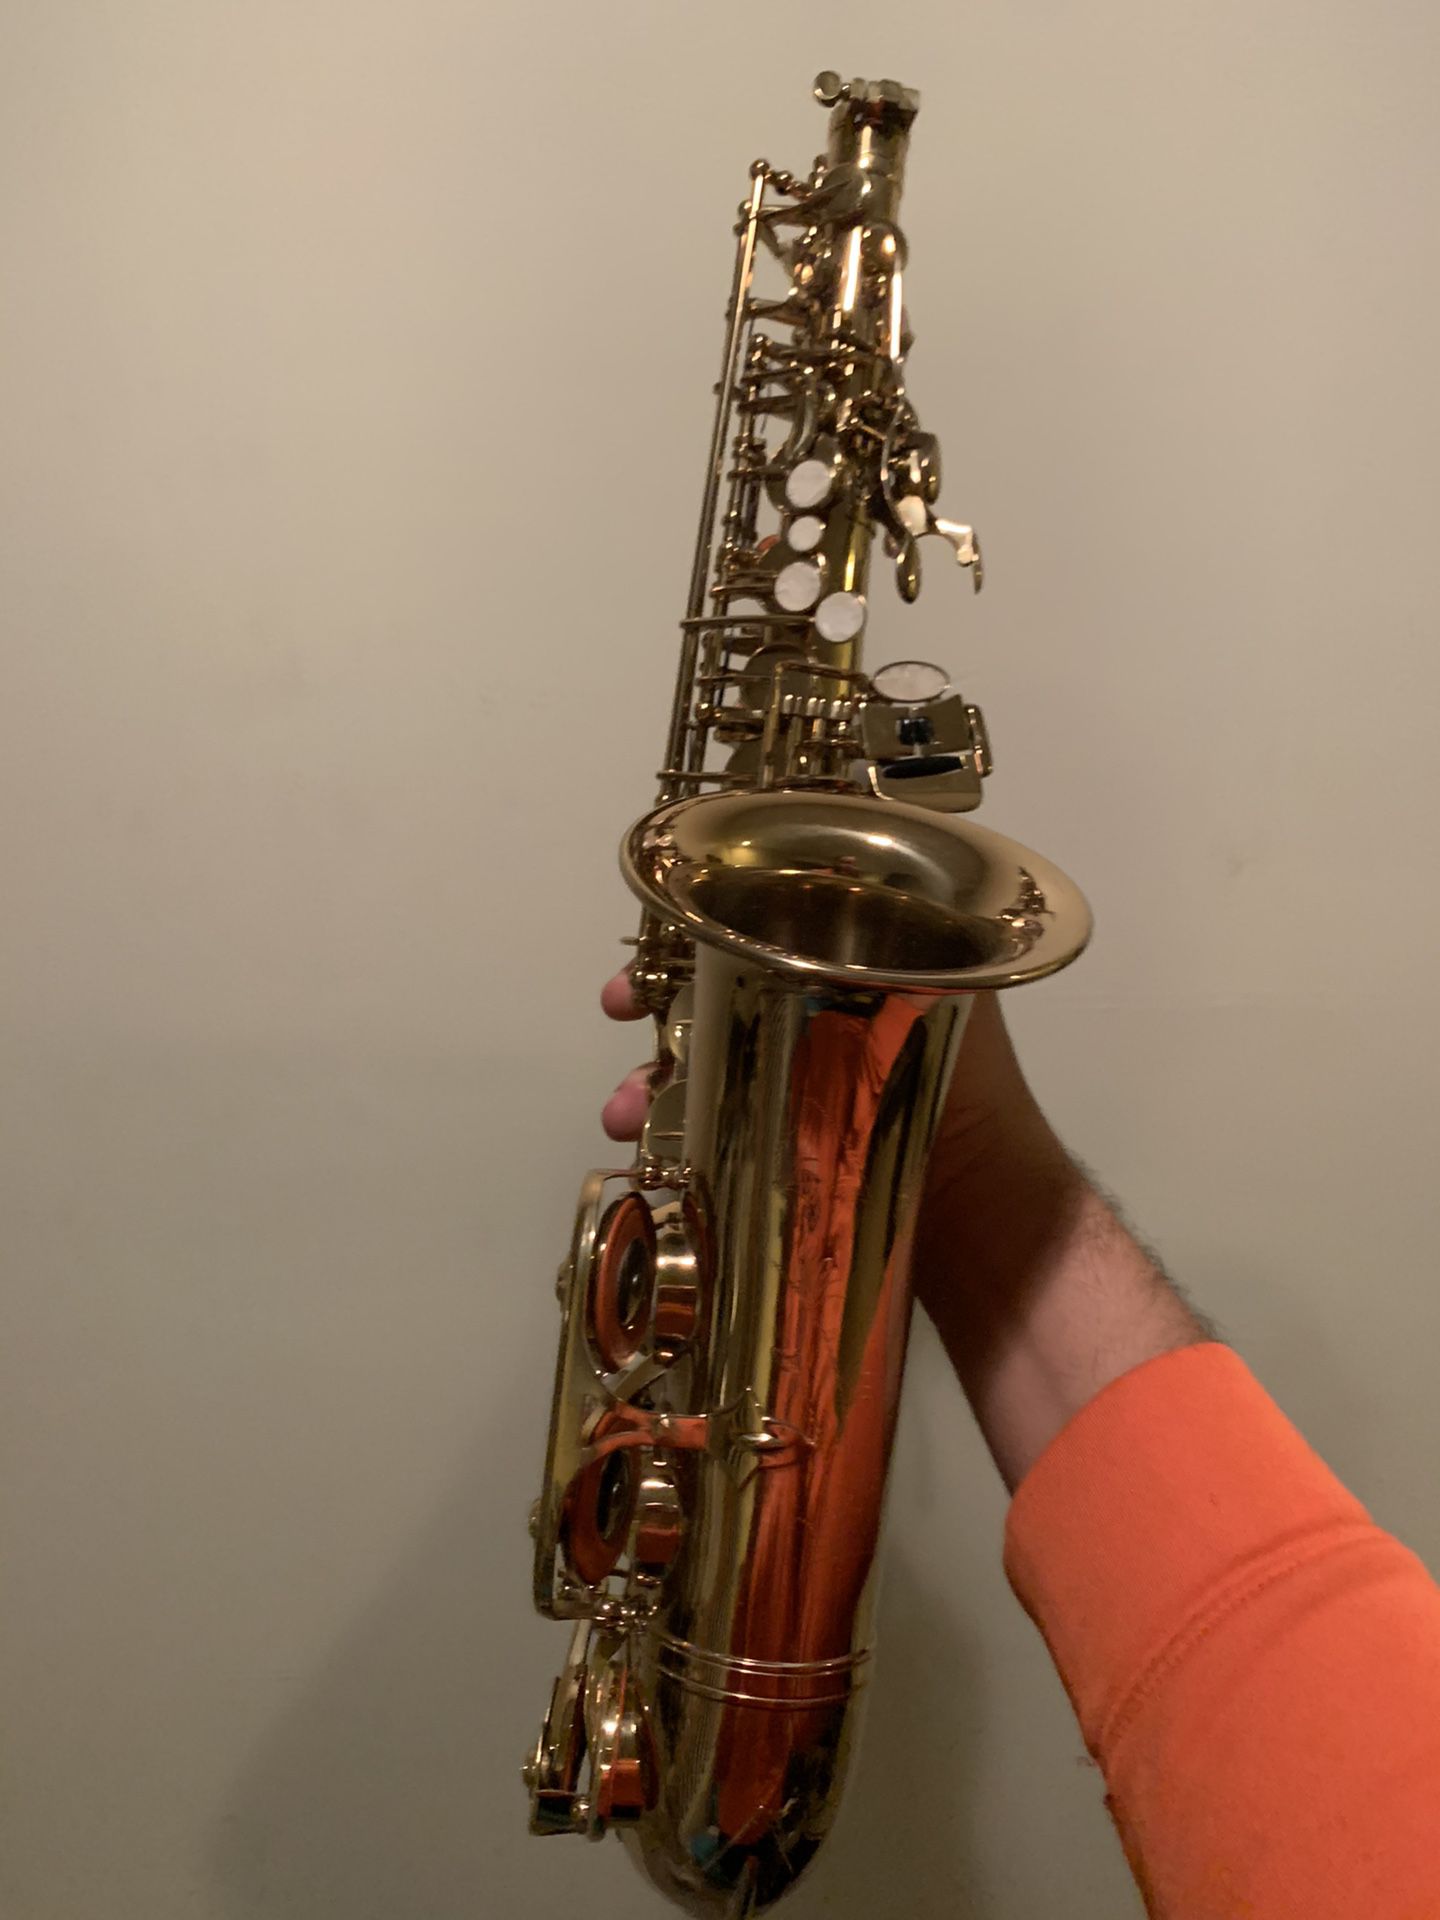 saxophone in good quality, very willing to negotiate on price